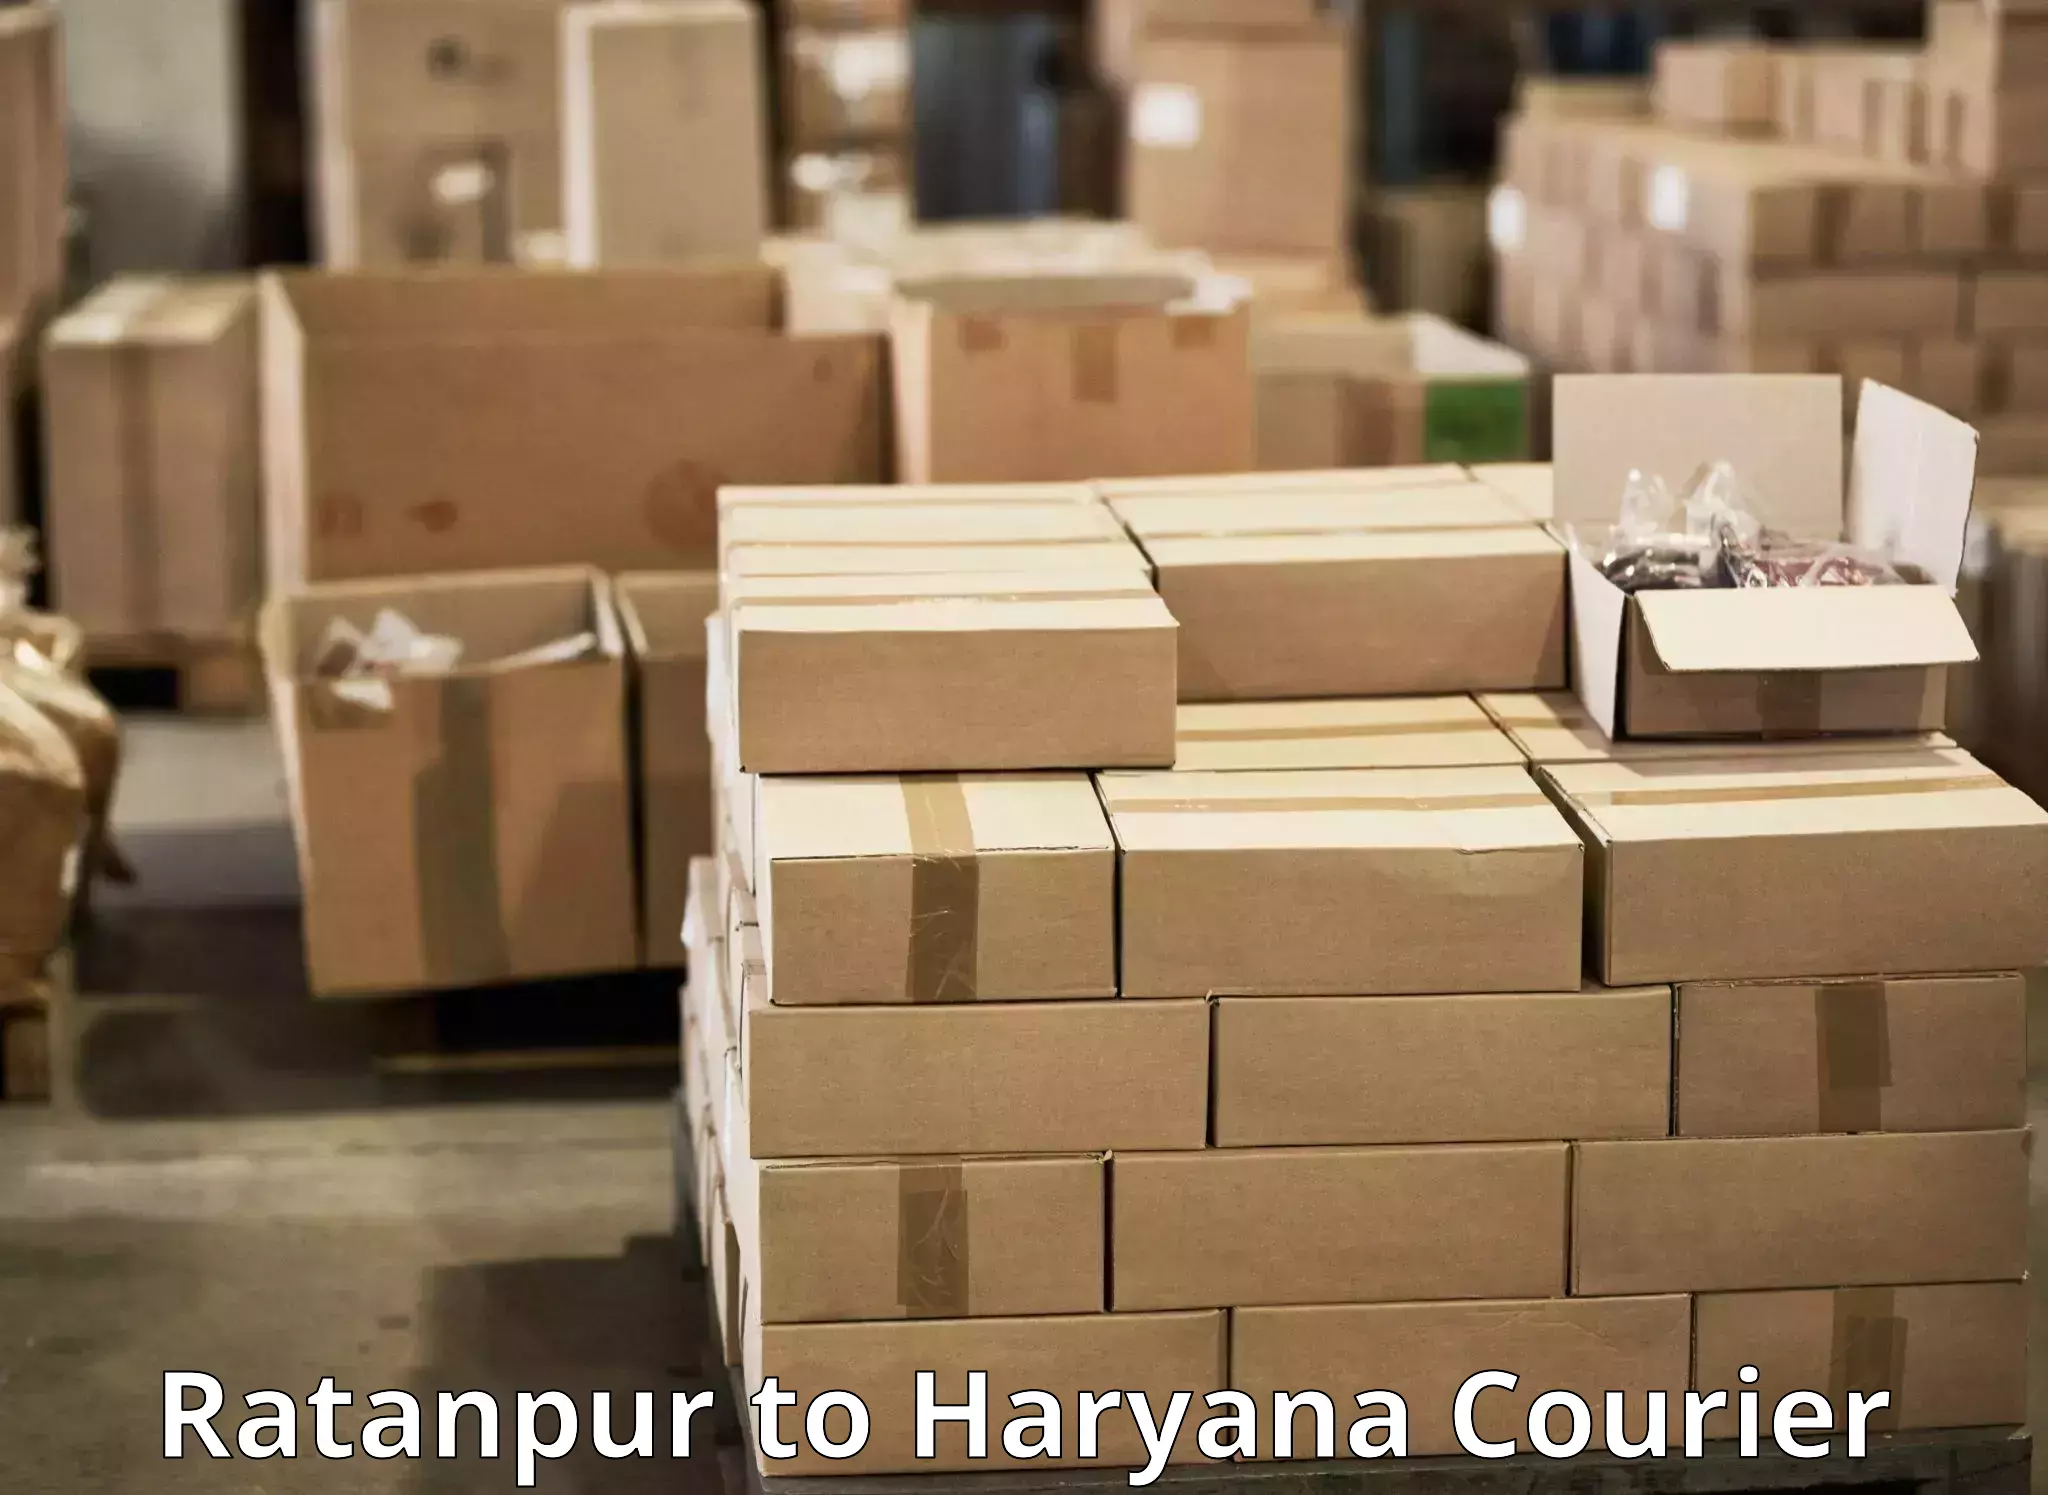 Online shipping calculator Ratanpur to Odhan